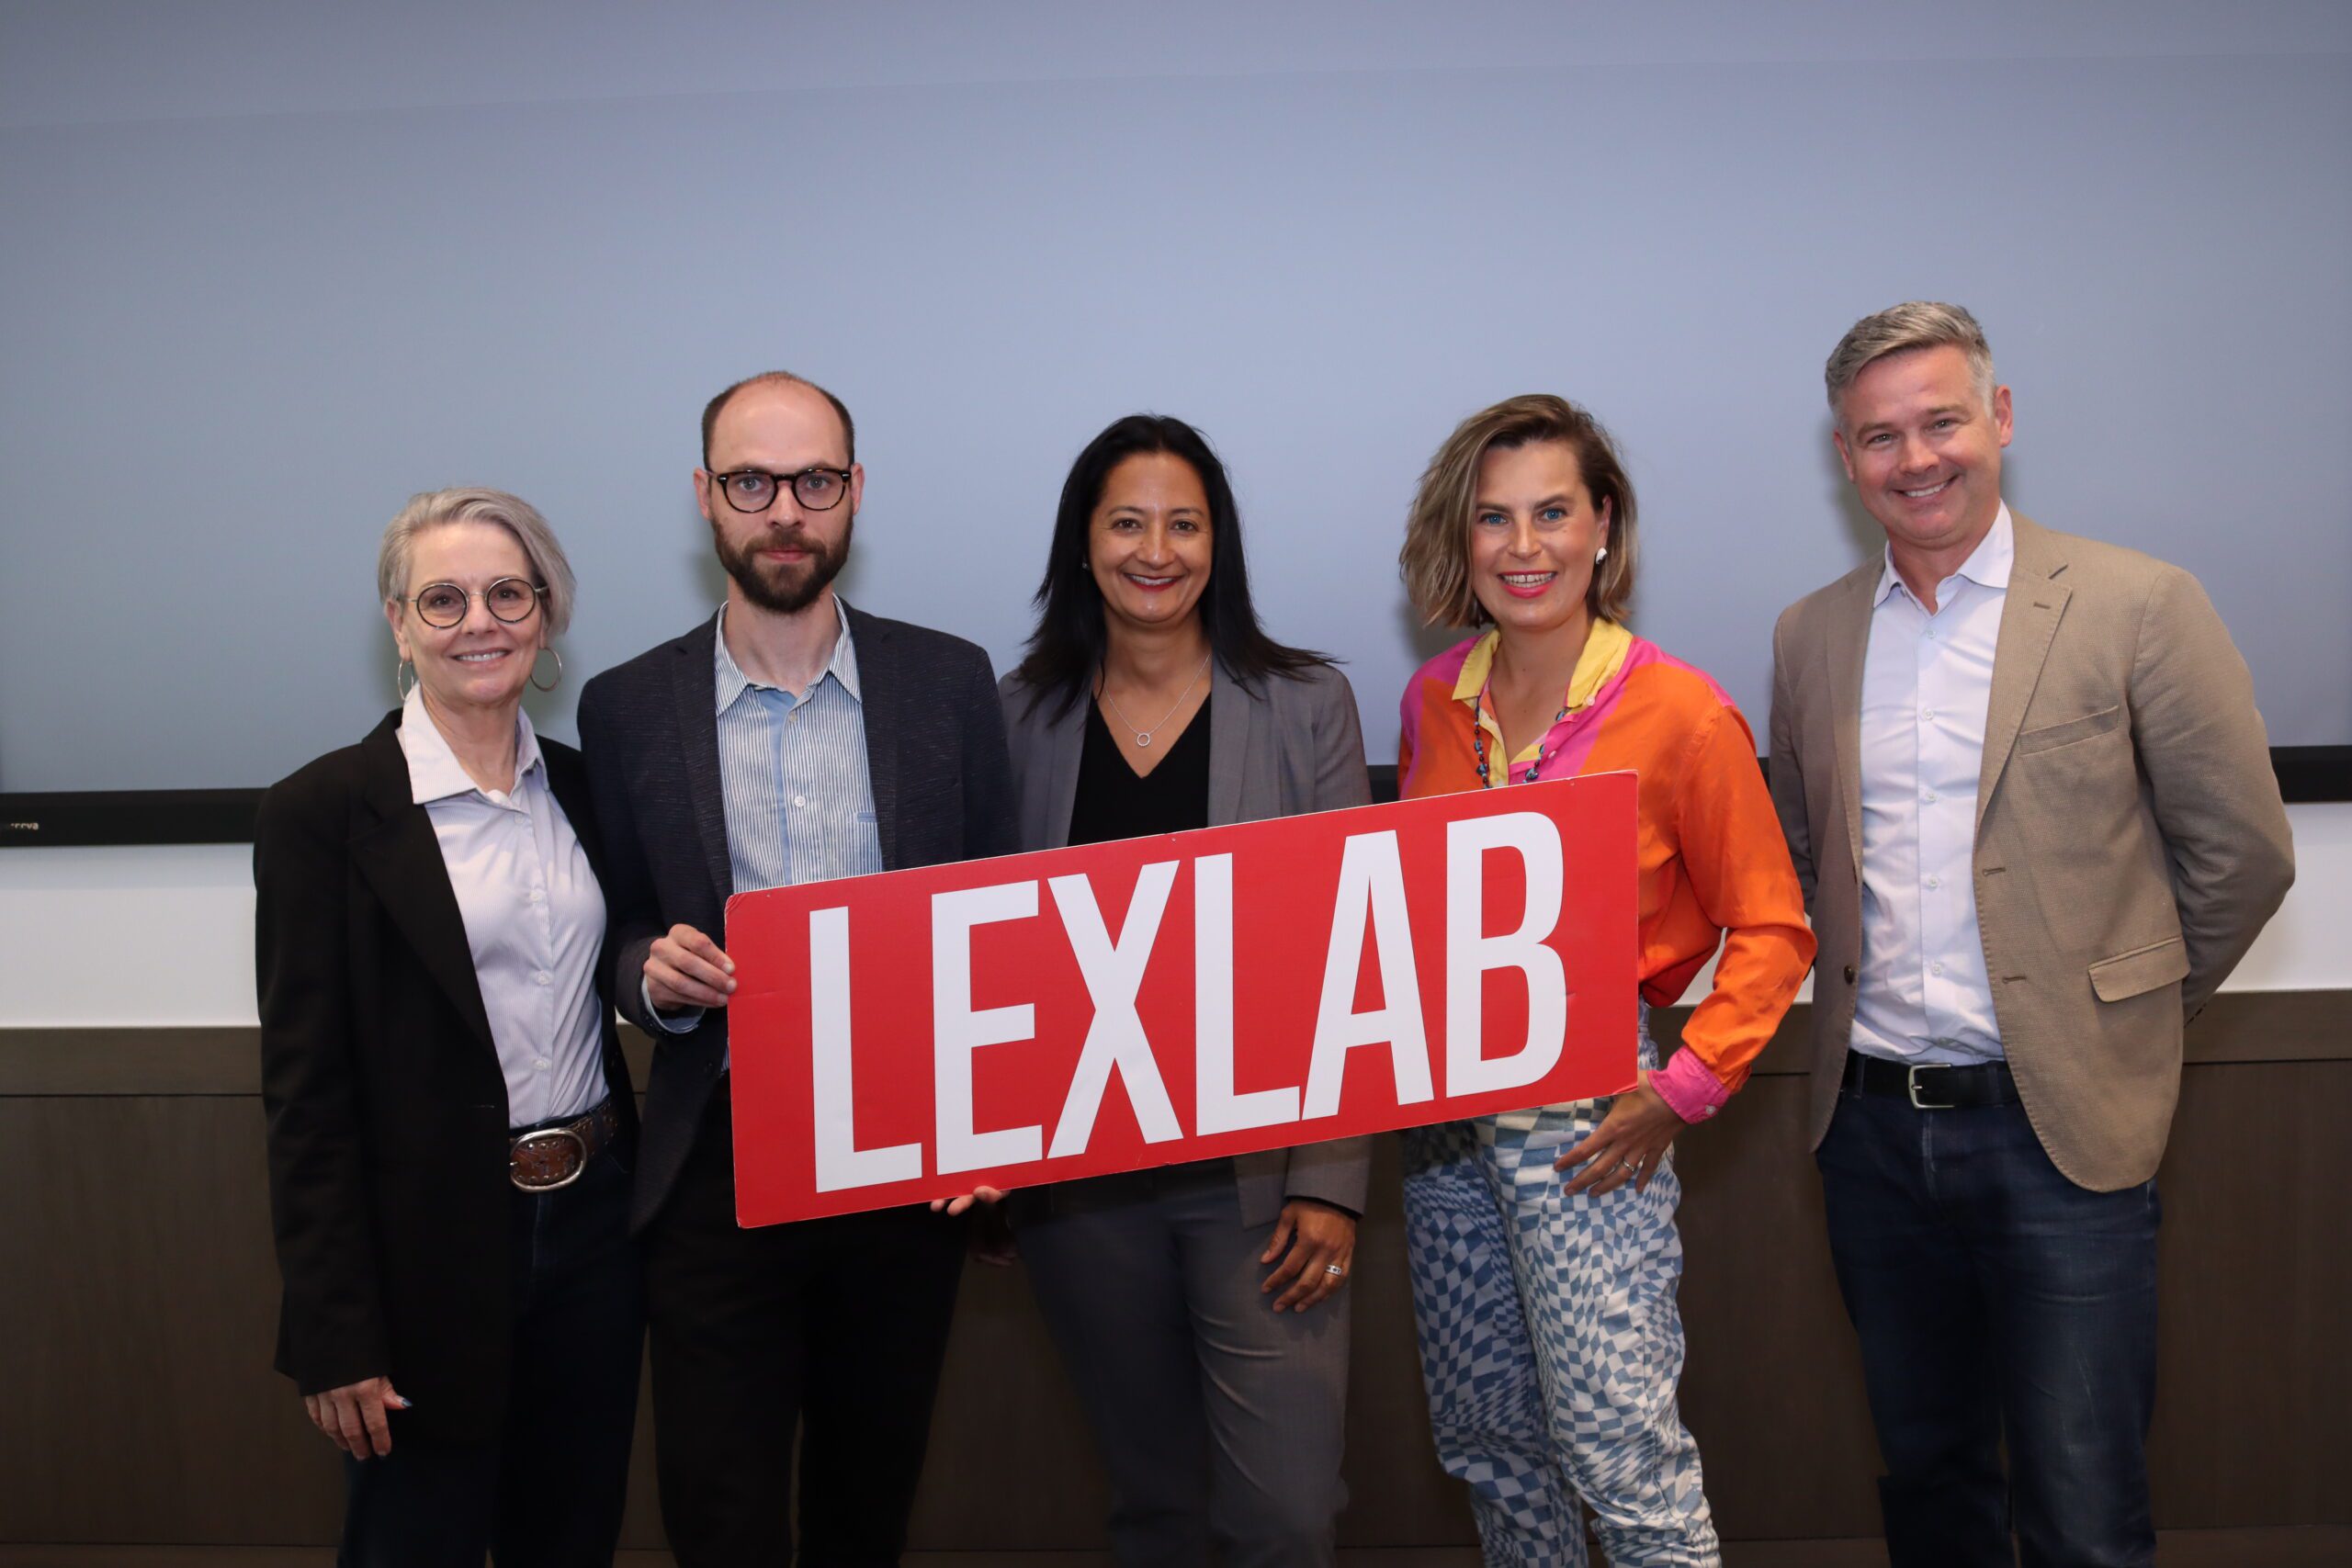 Professors and legal technology entrepreneurs pose with a UC Hastings LexLab sign